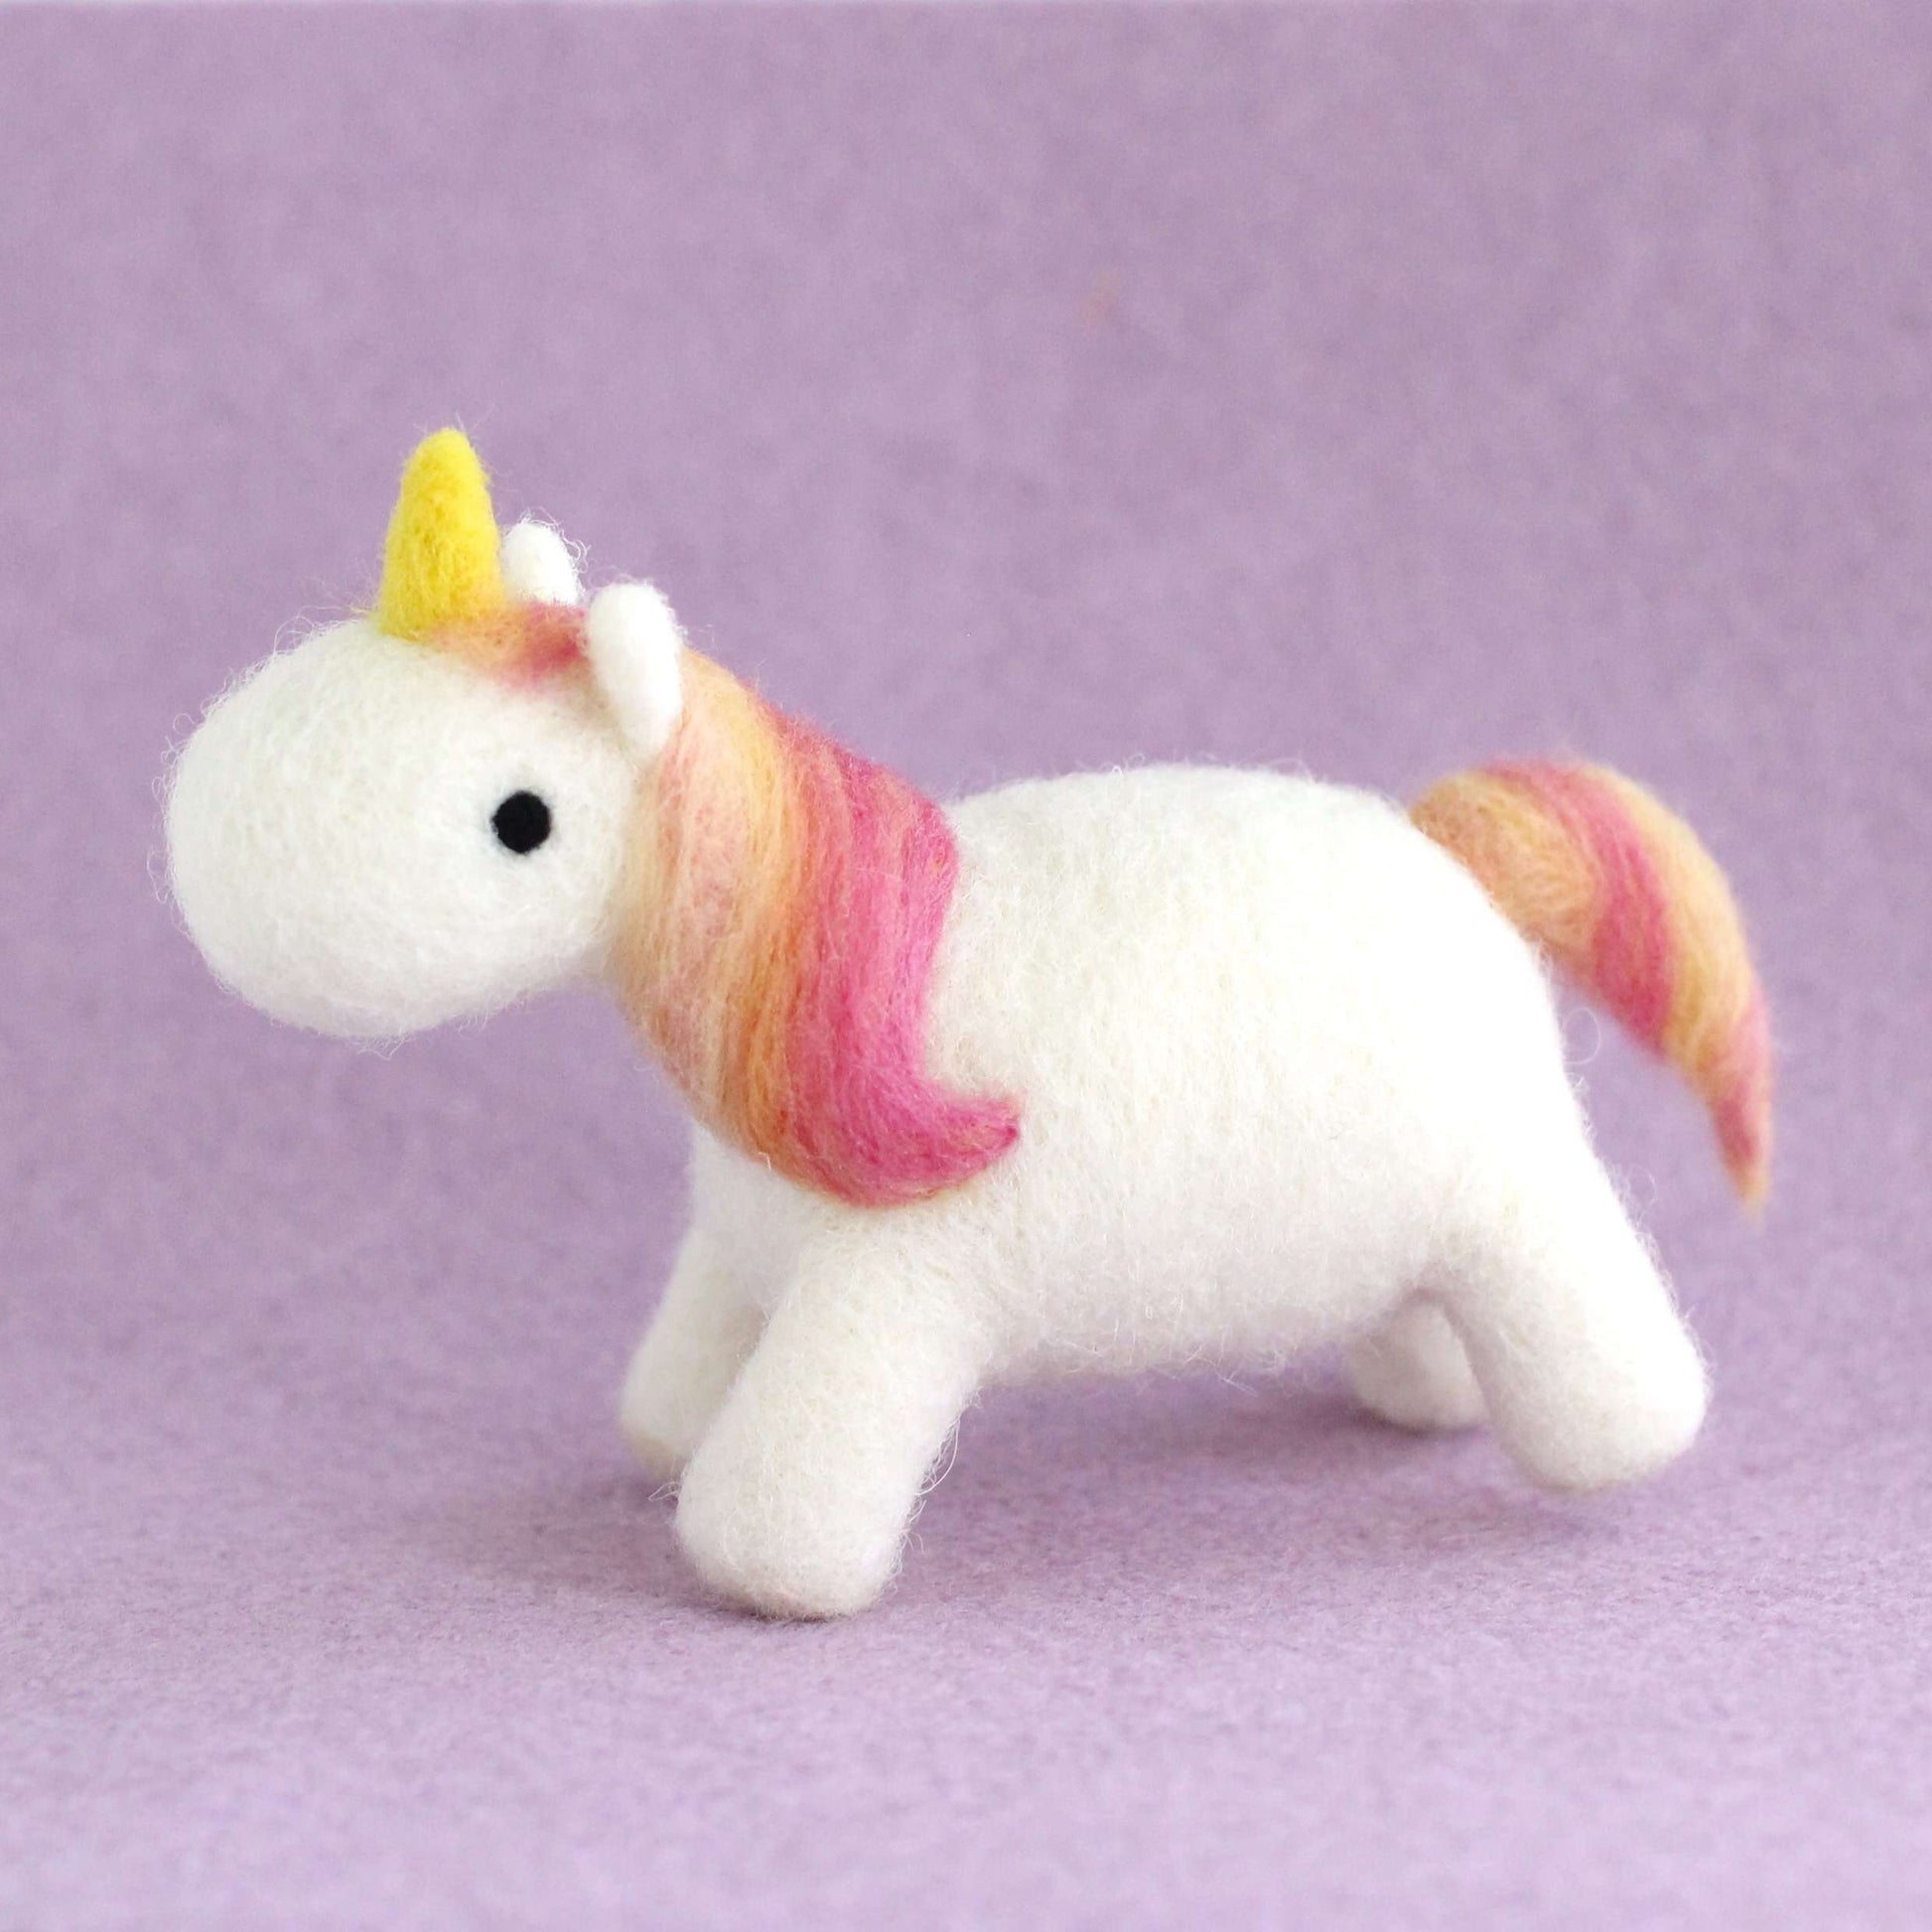 Needle Felted Rainbow Sherbet Unicorn by Wild Whimsy Woolies